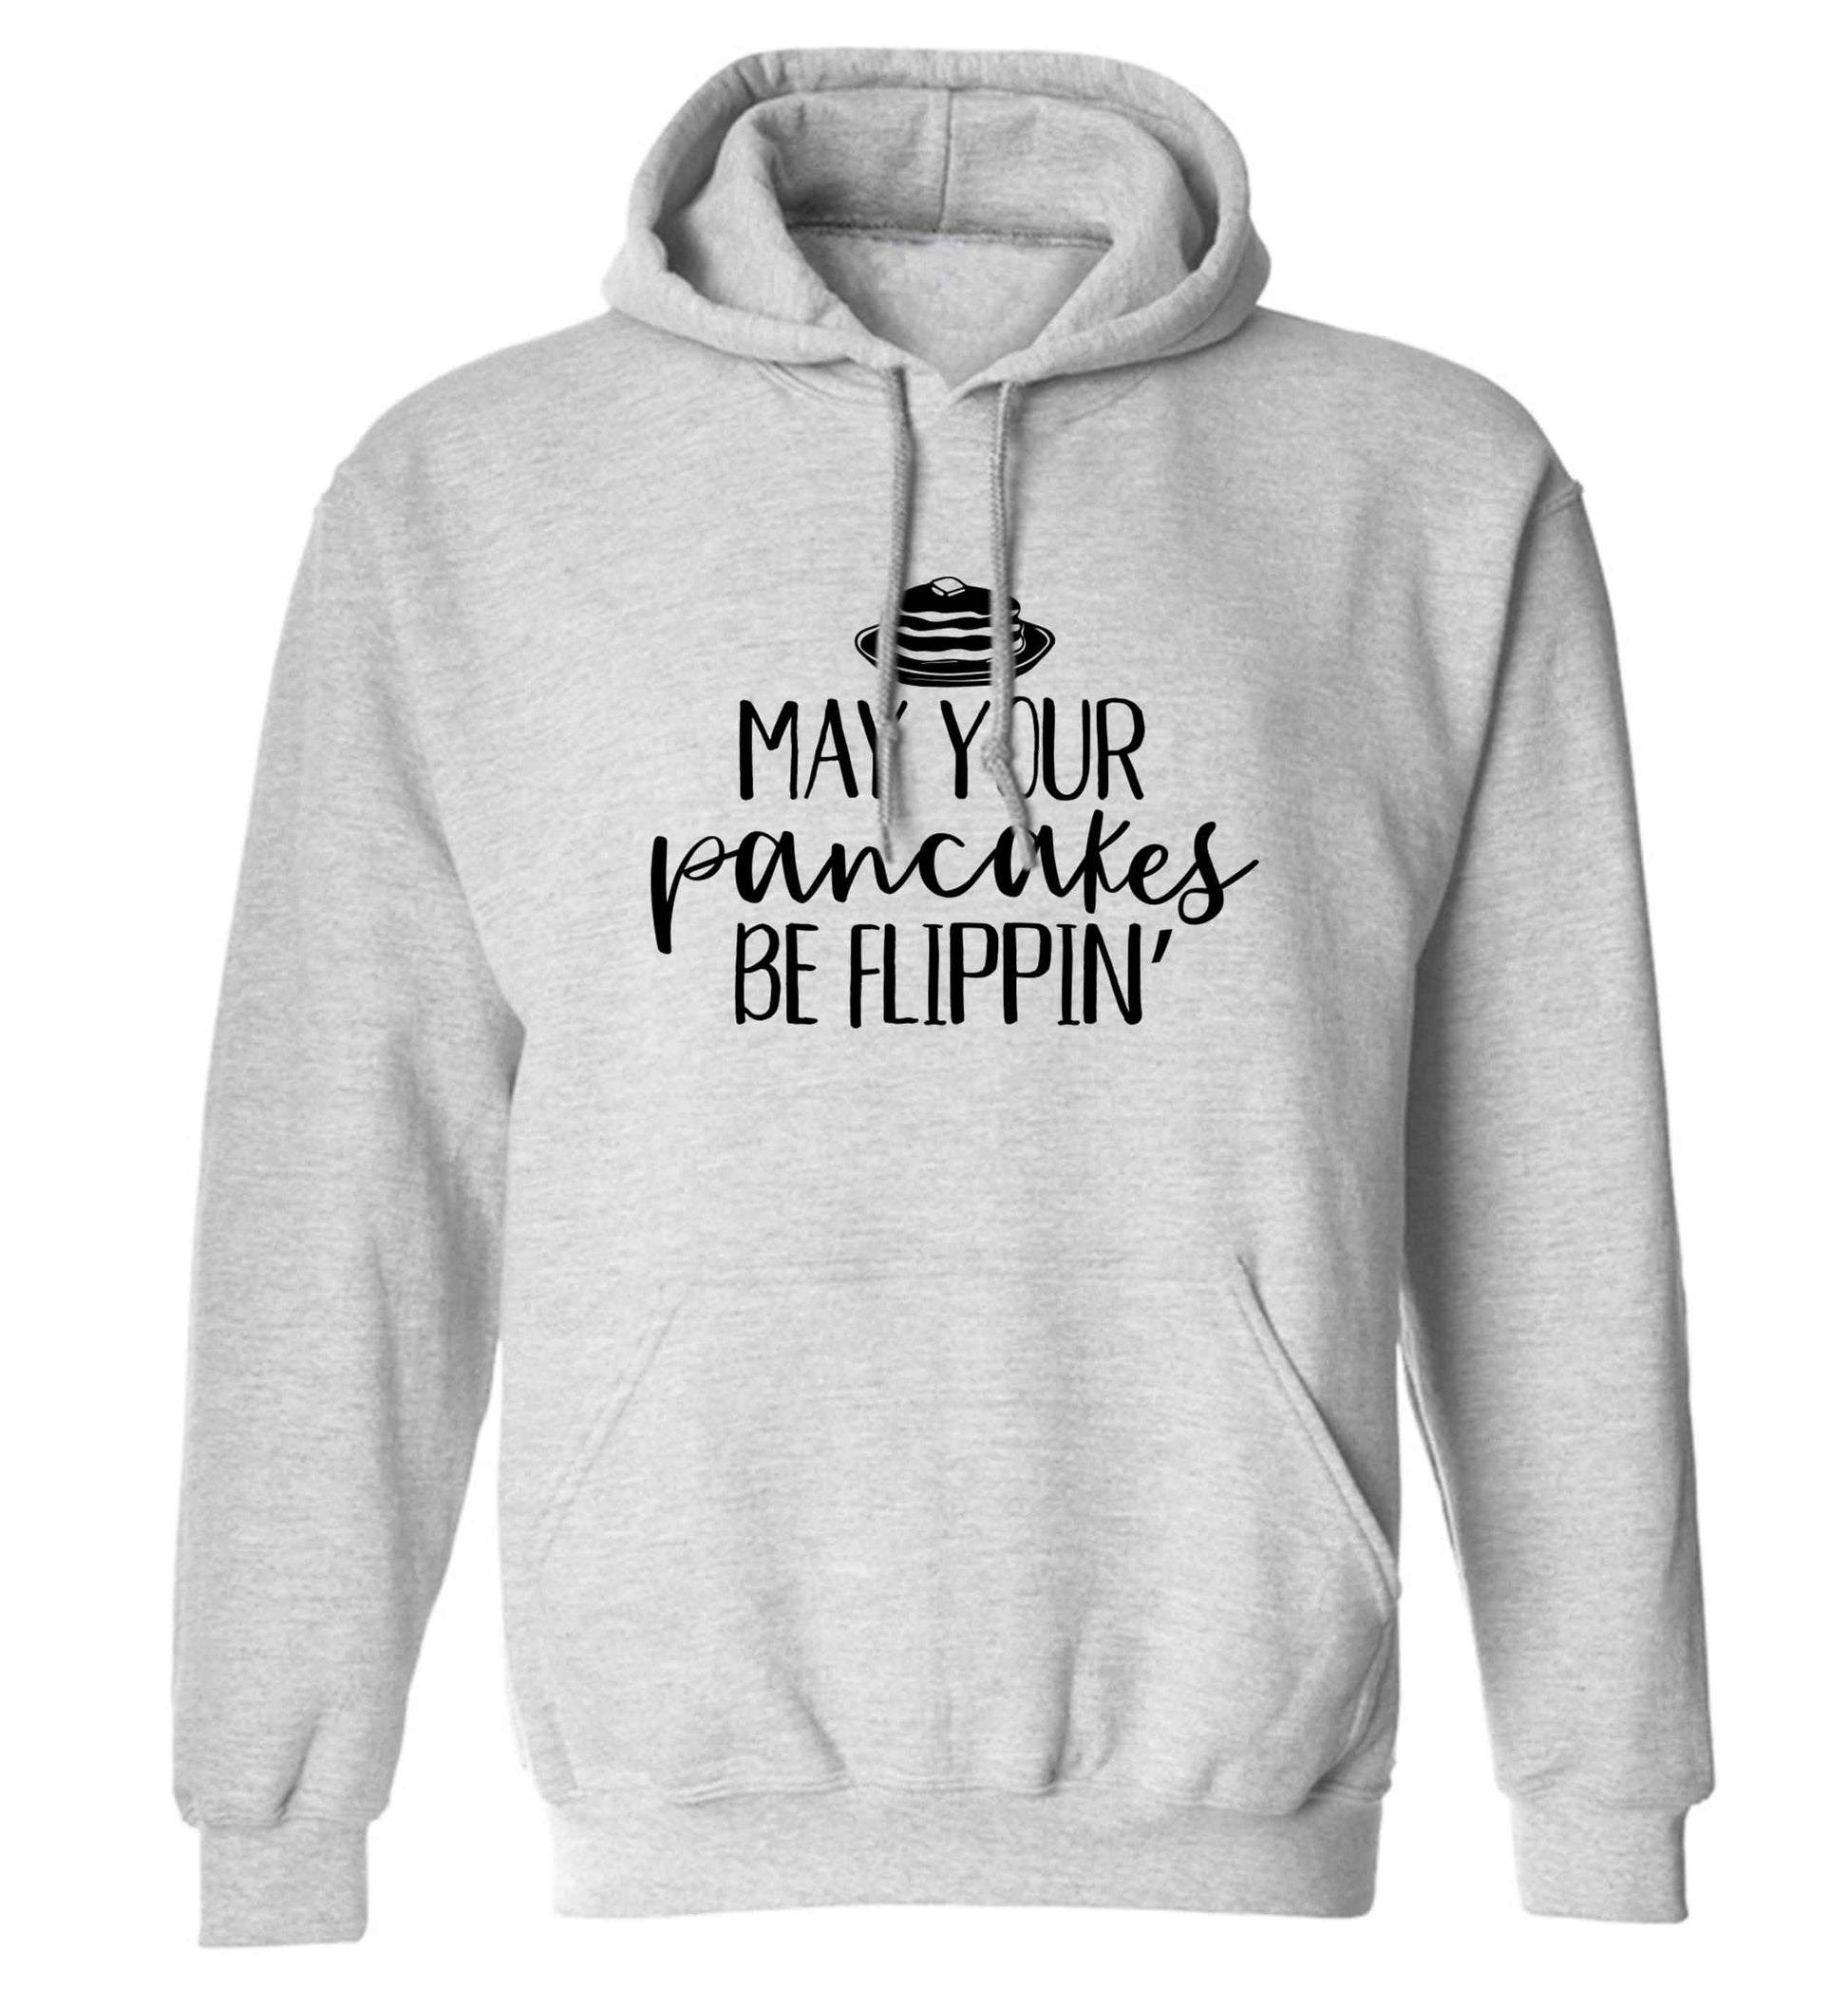 May your pancakes be flippin' adults unisex grey hoodie 2XL